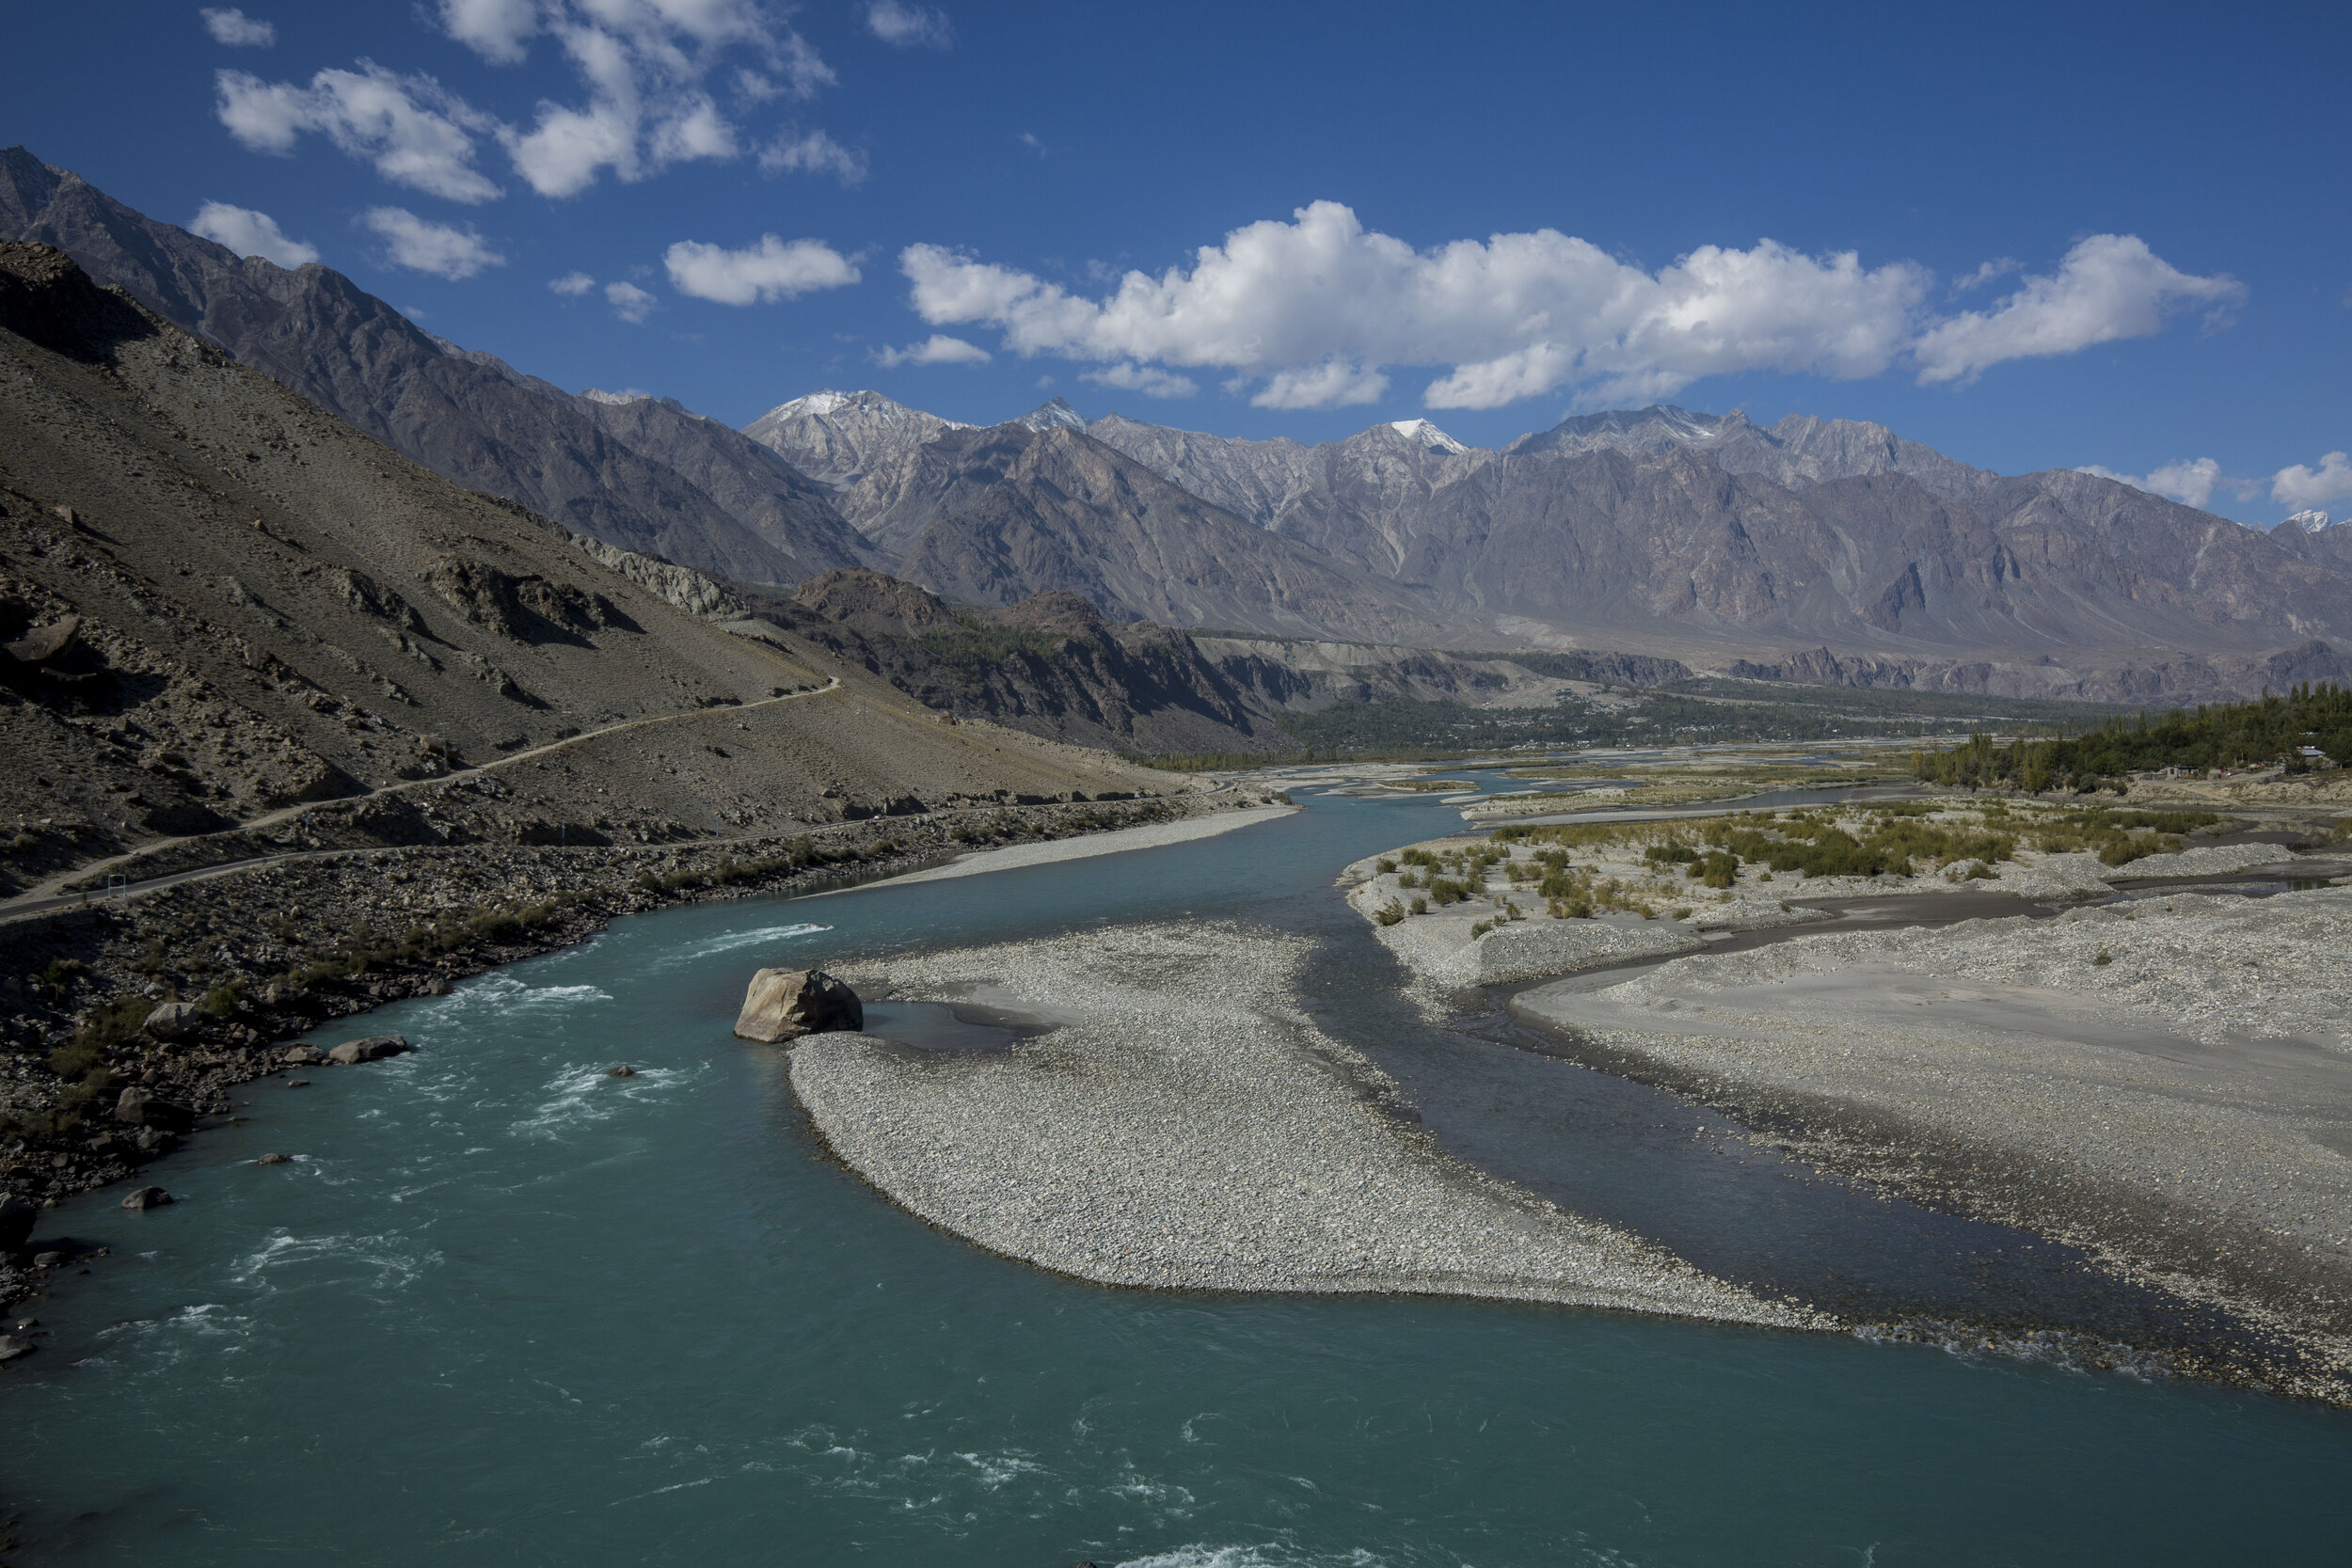  Gilgit River runs along the highway towards Yasin Valley, an area with extremely poor internet access.    